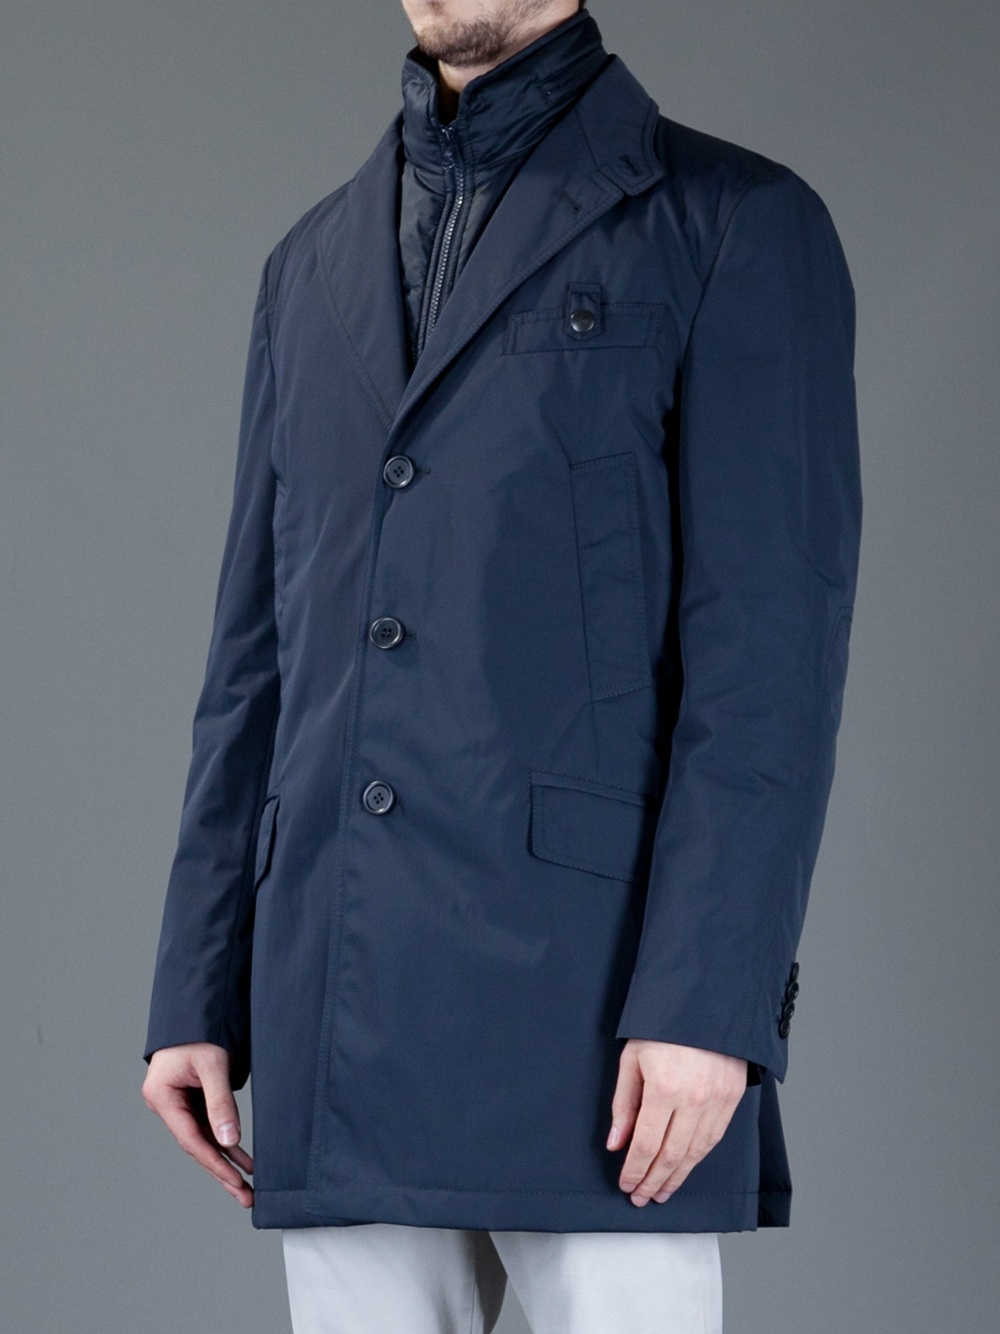 Fay Driving Coat in Blue for Men - Lyst